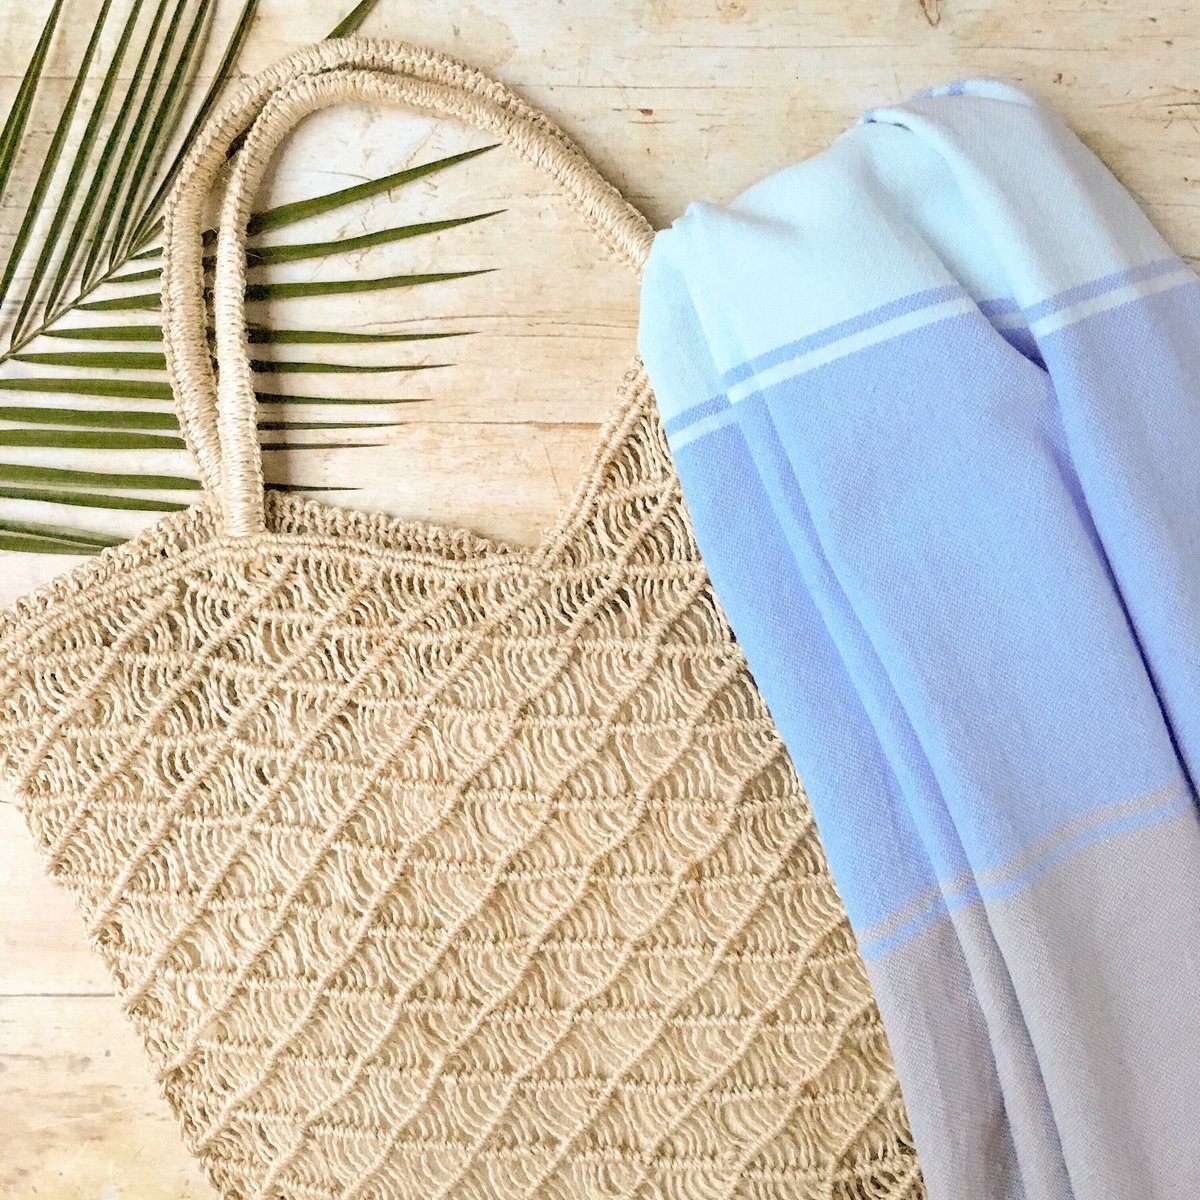 🌴 Who else is fed up with these grey, damp days?  Dreaming of beach getaways? Not just us then!
This is the Olivia Jute Tote Bag in Natural and the Annecy Hammam Towel in Cornflower🌴sandandsalt.co.uk #hammamtowel #jutebag #sandandsalt #beachlife #simplelife #holidayinspo